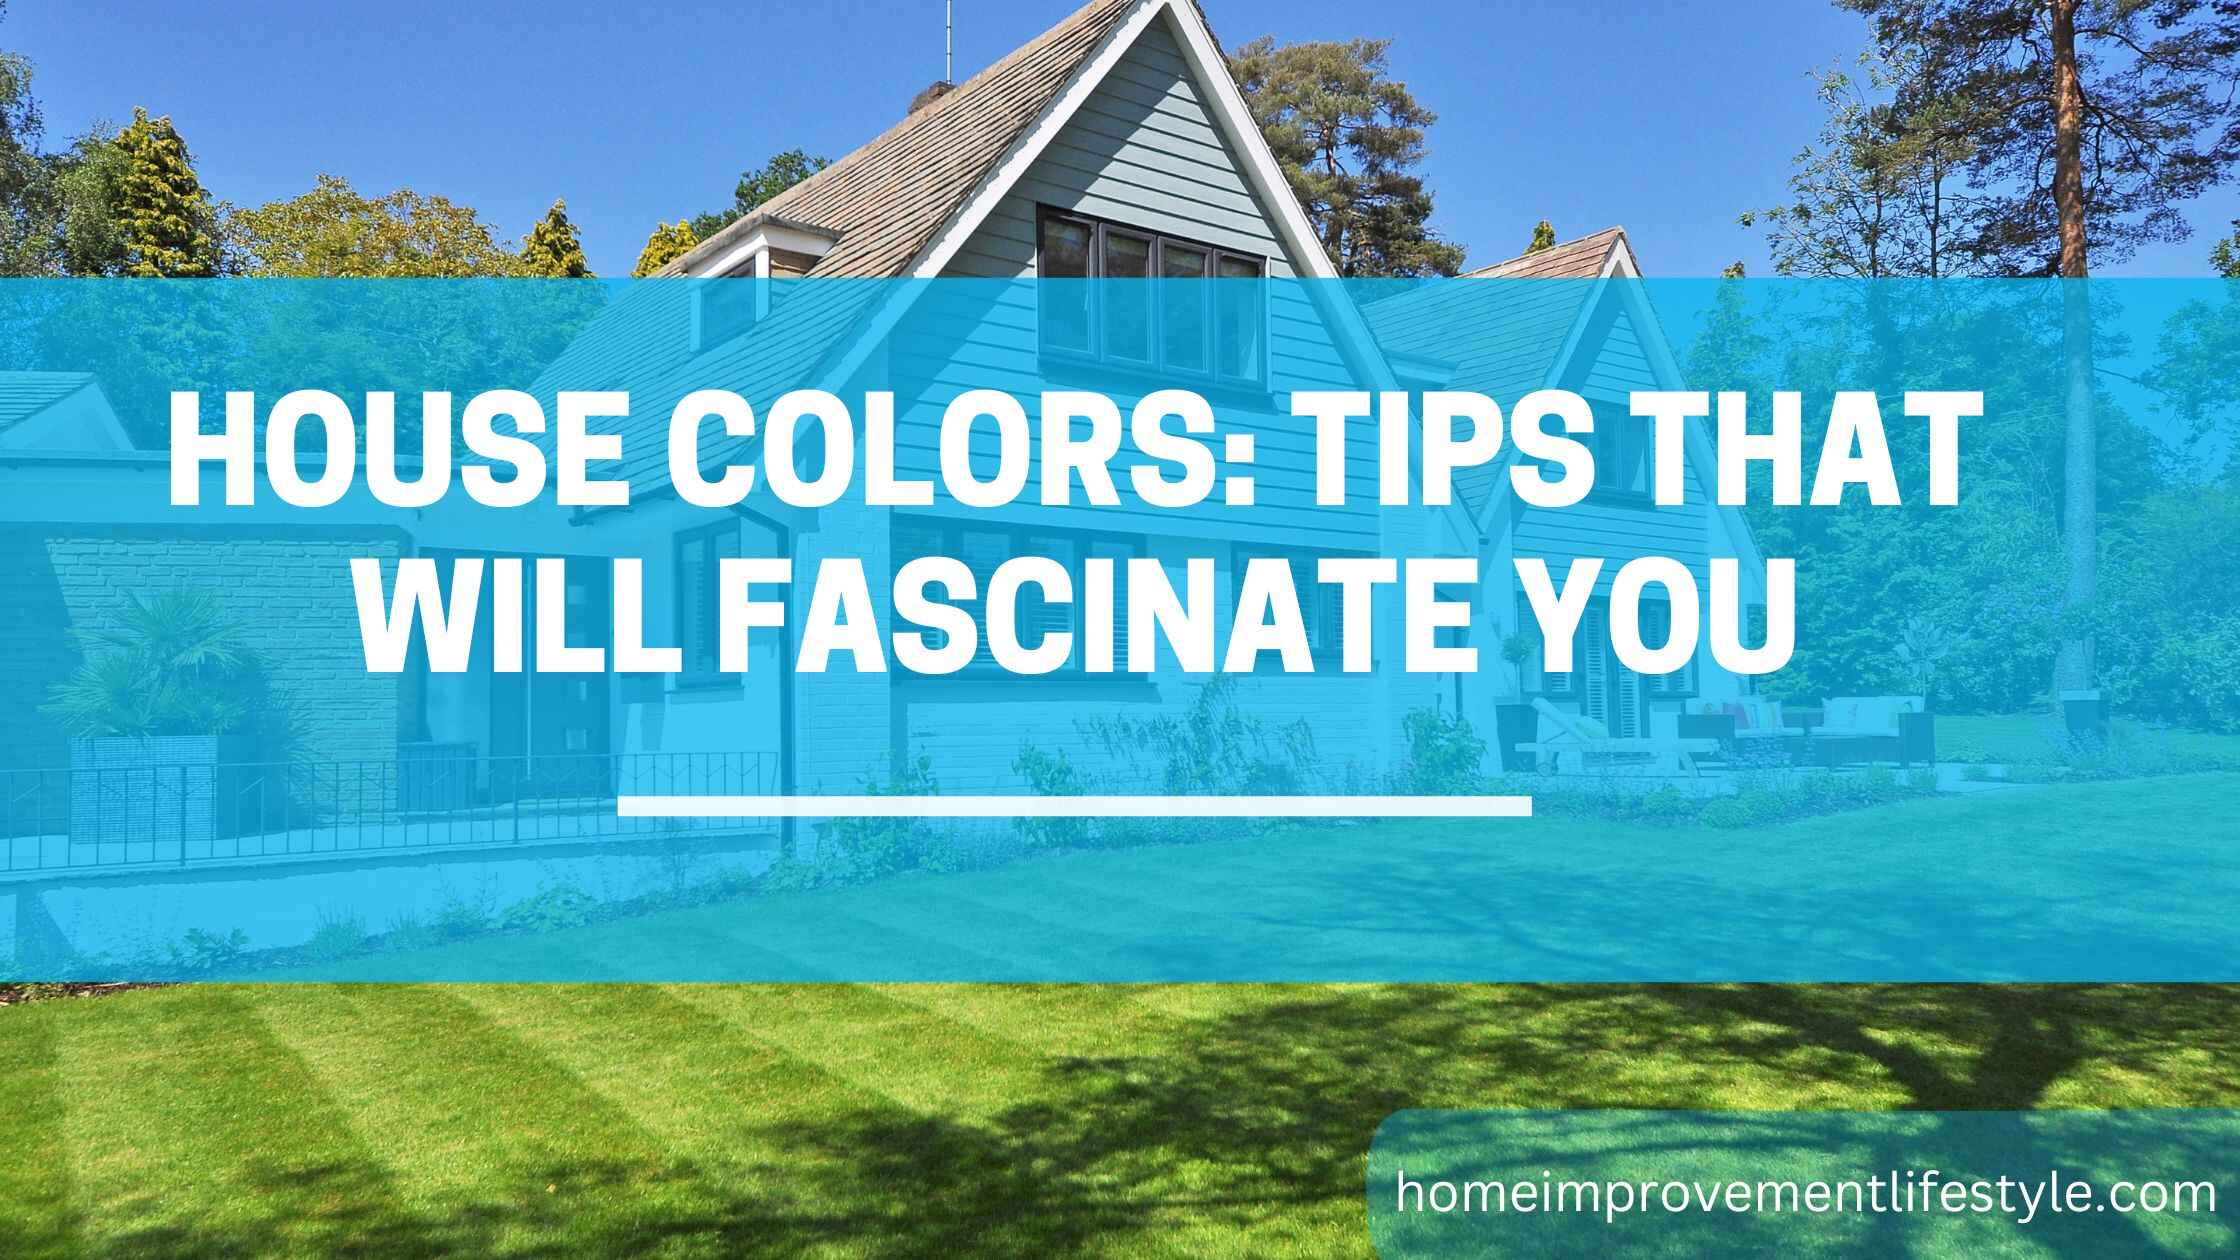 House colors: tips that will fascinate you